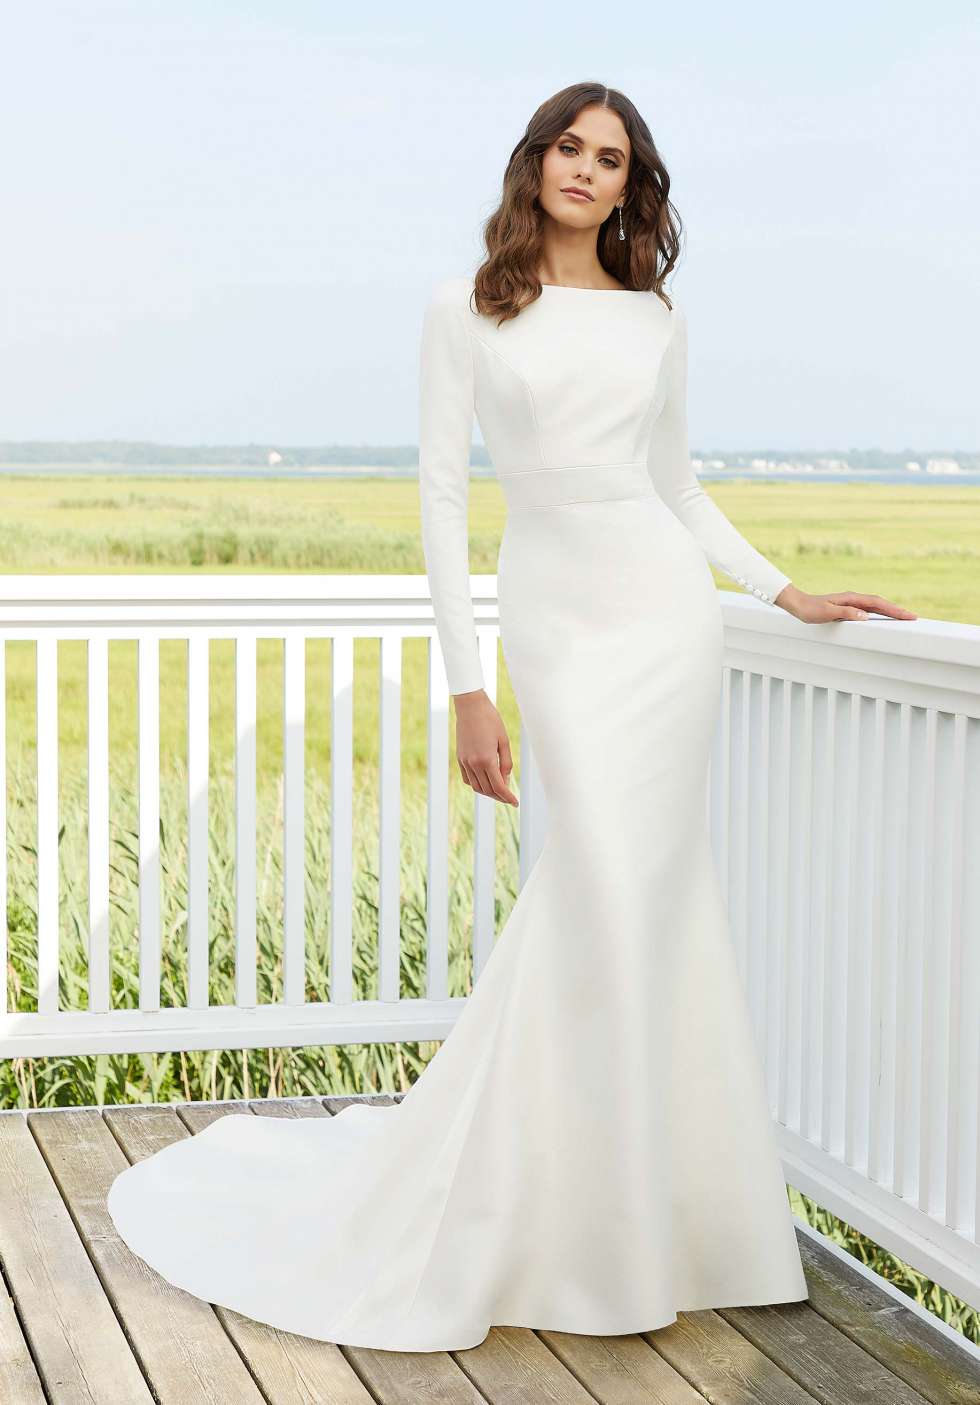 The Other White Dress by Morilee for 2022